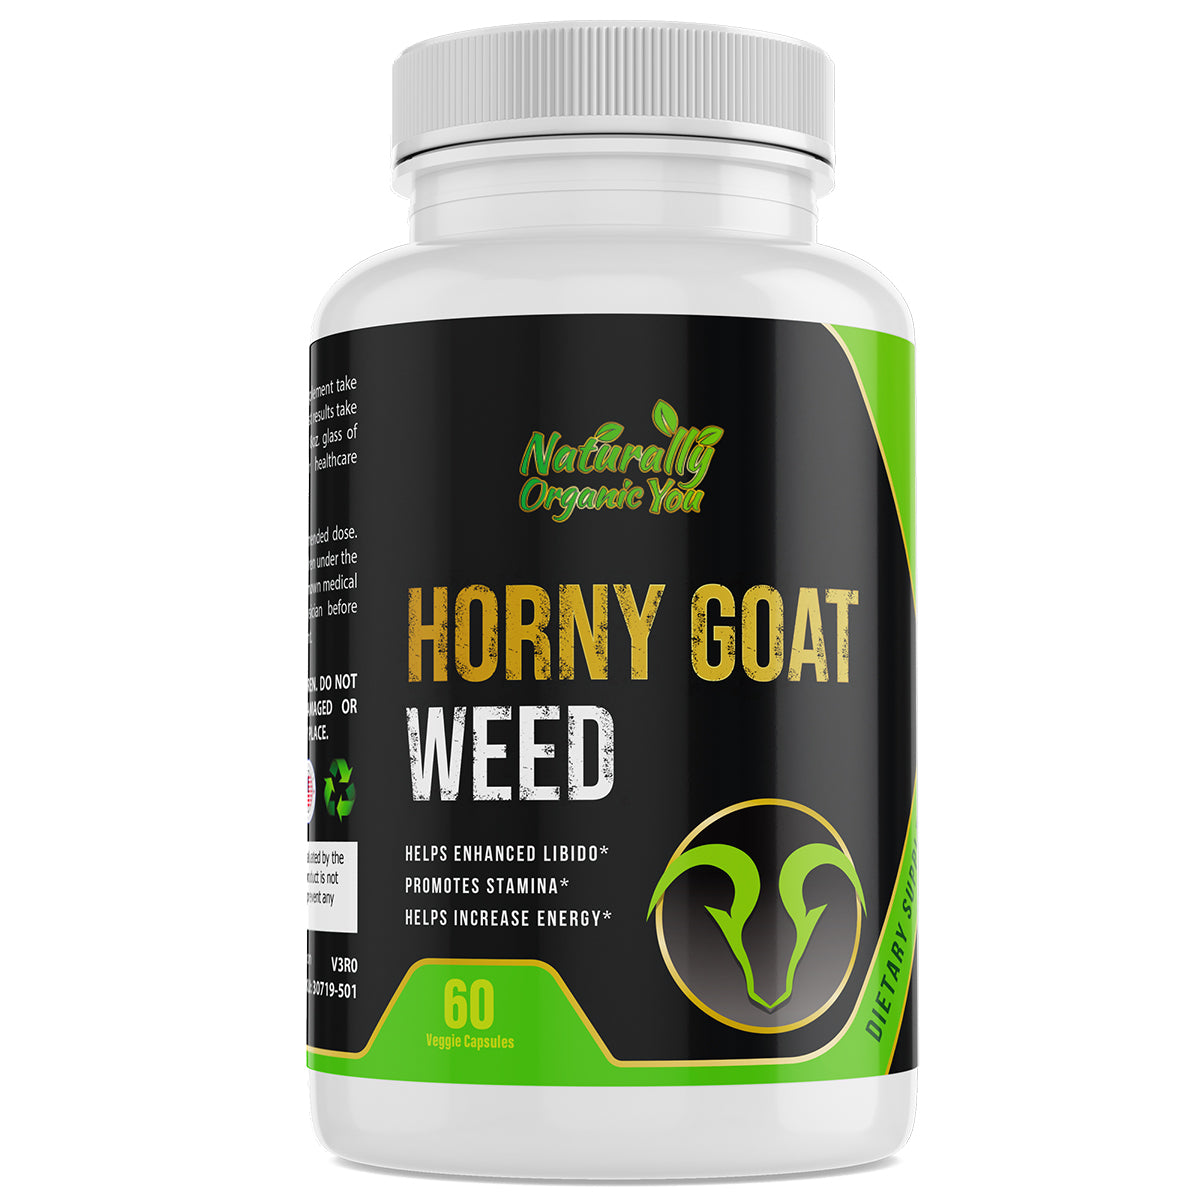 HORNY GOAT WEED